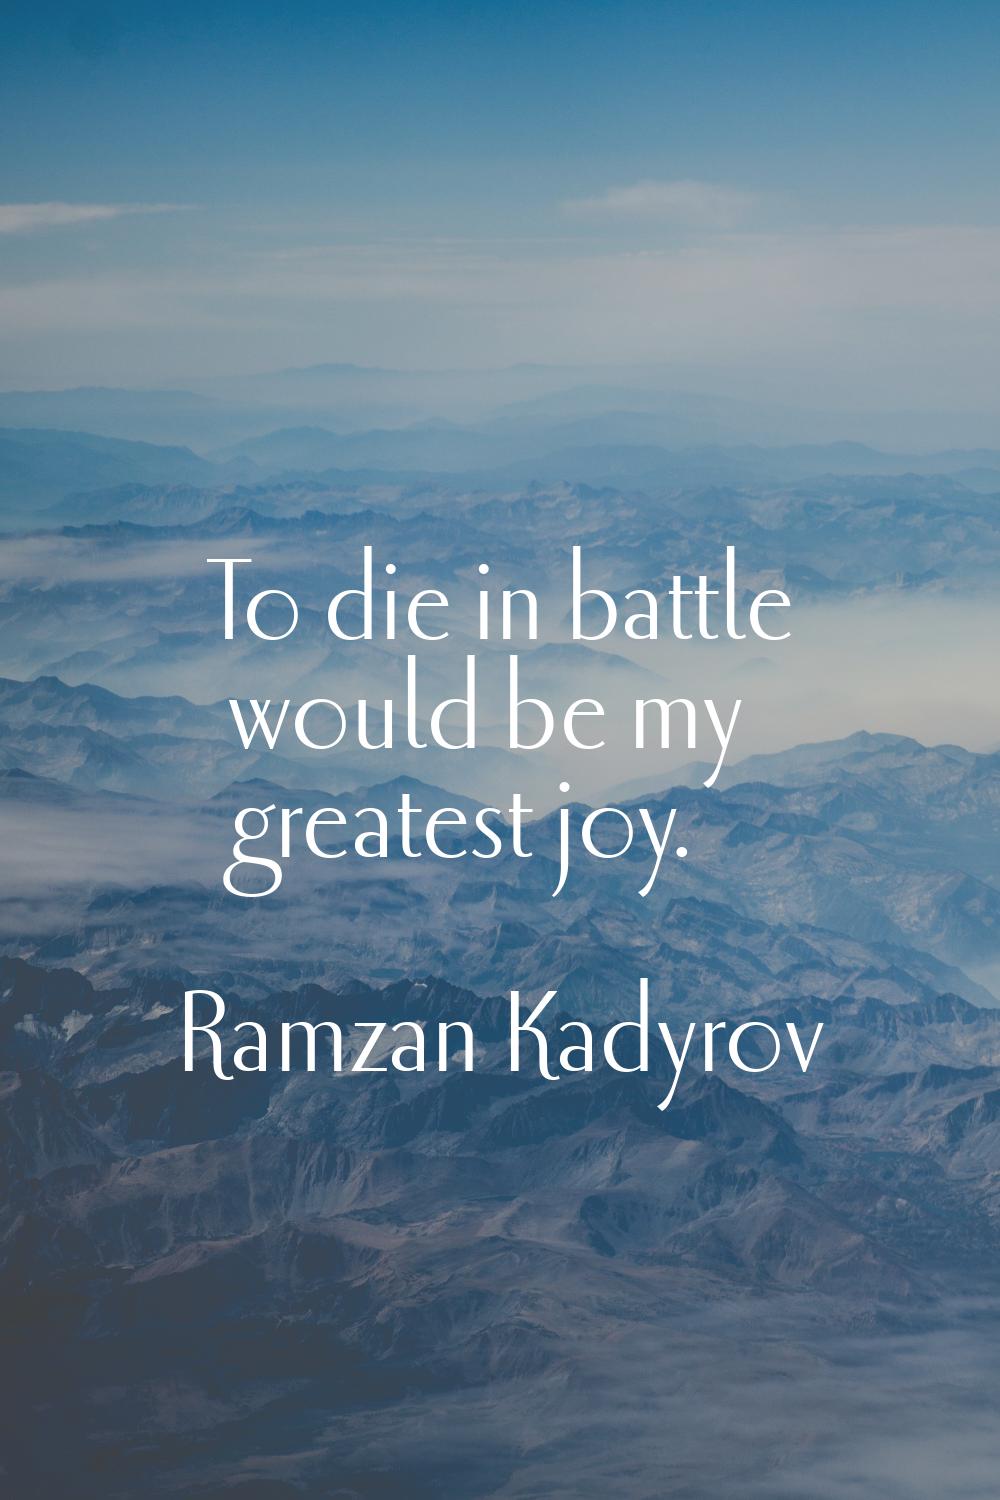 To die in battle would be my greatest joy.